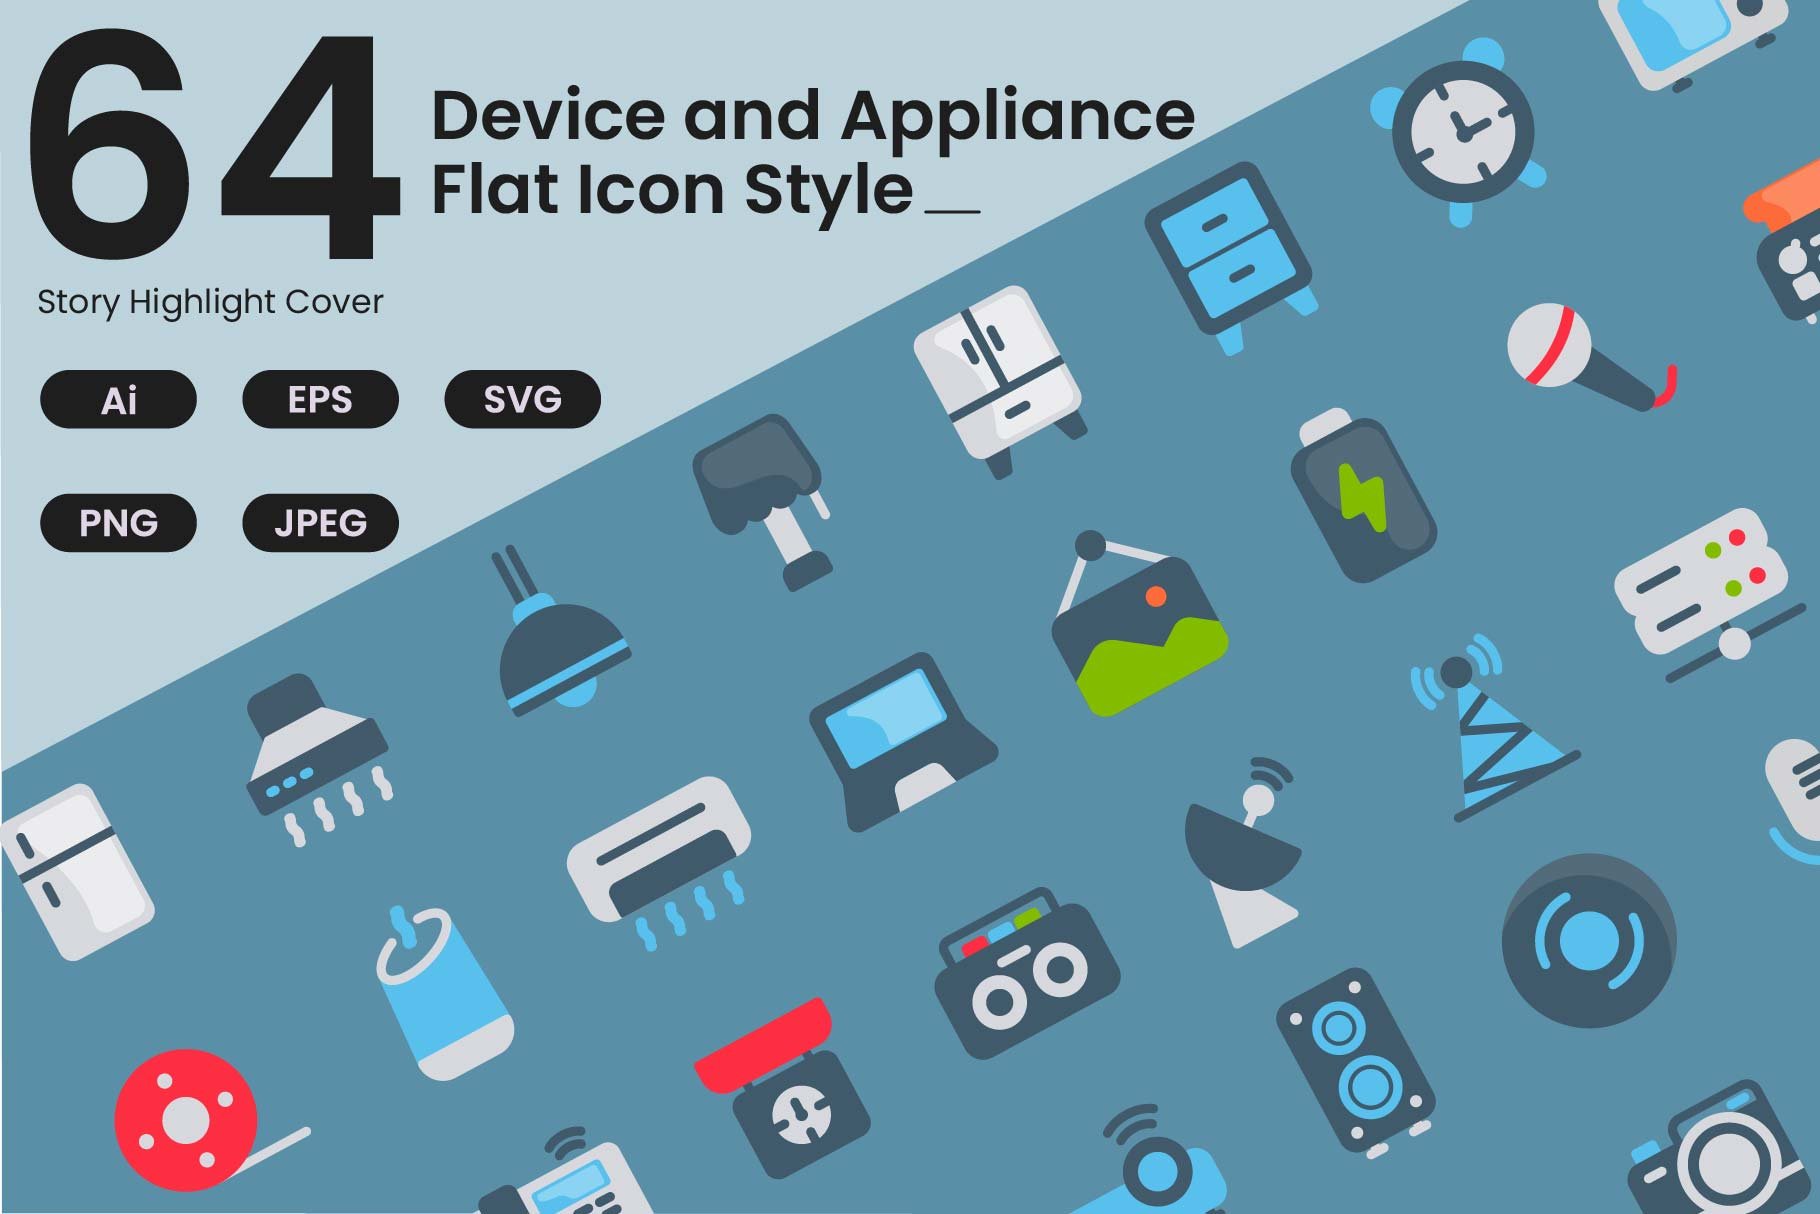 Device Appliance Icon Flat Style cover image.